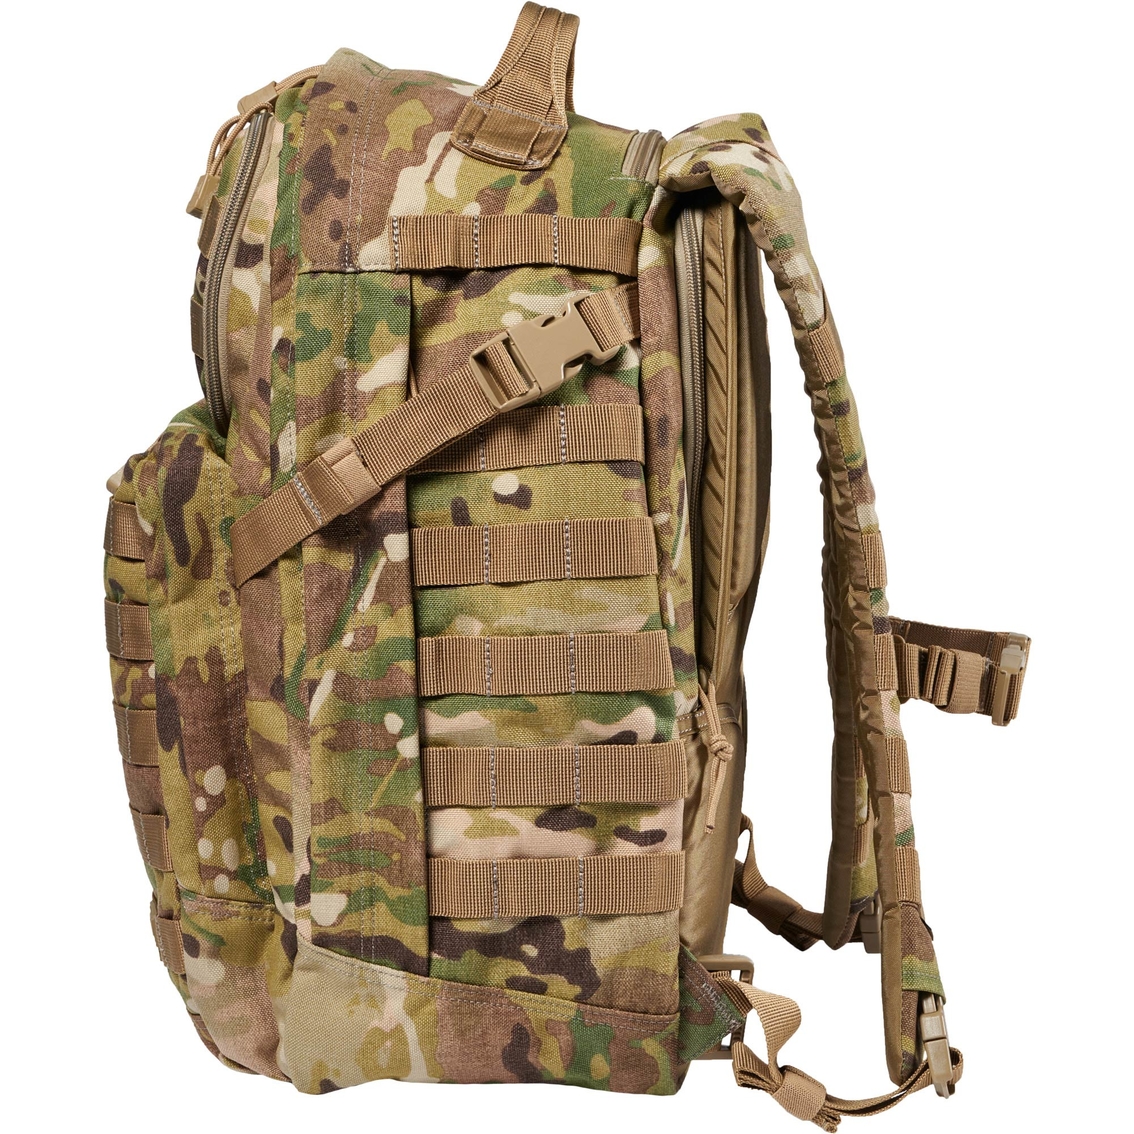 5.11 RUSH 24 2.0 Backpack - Image 6 of 10